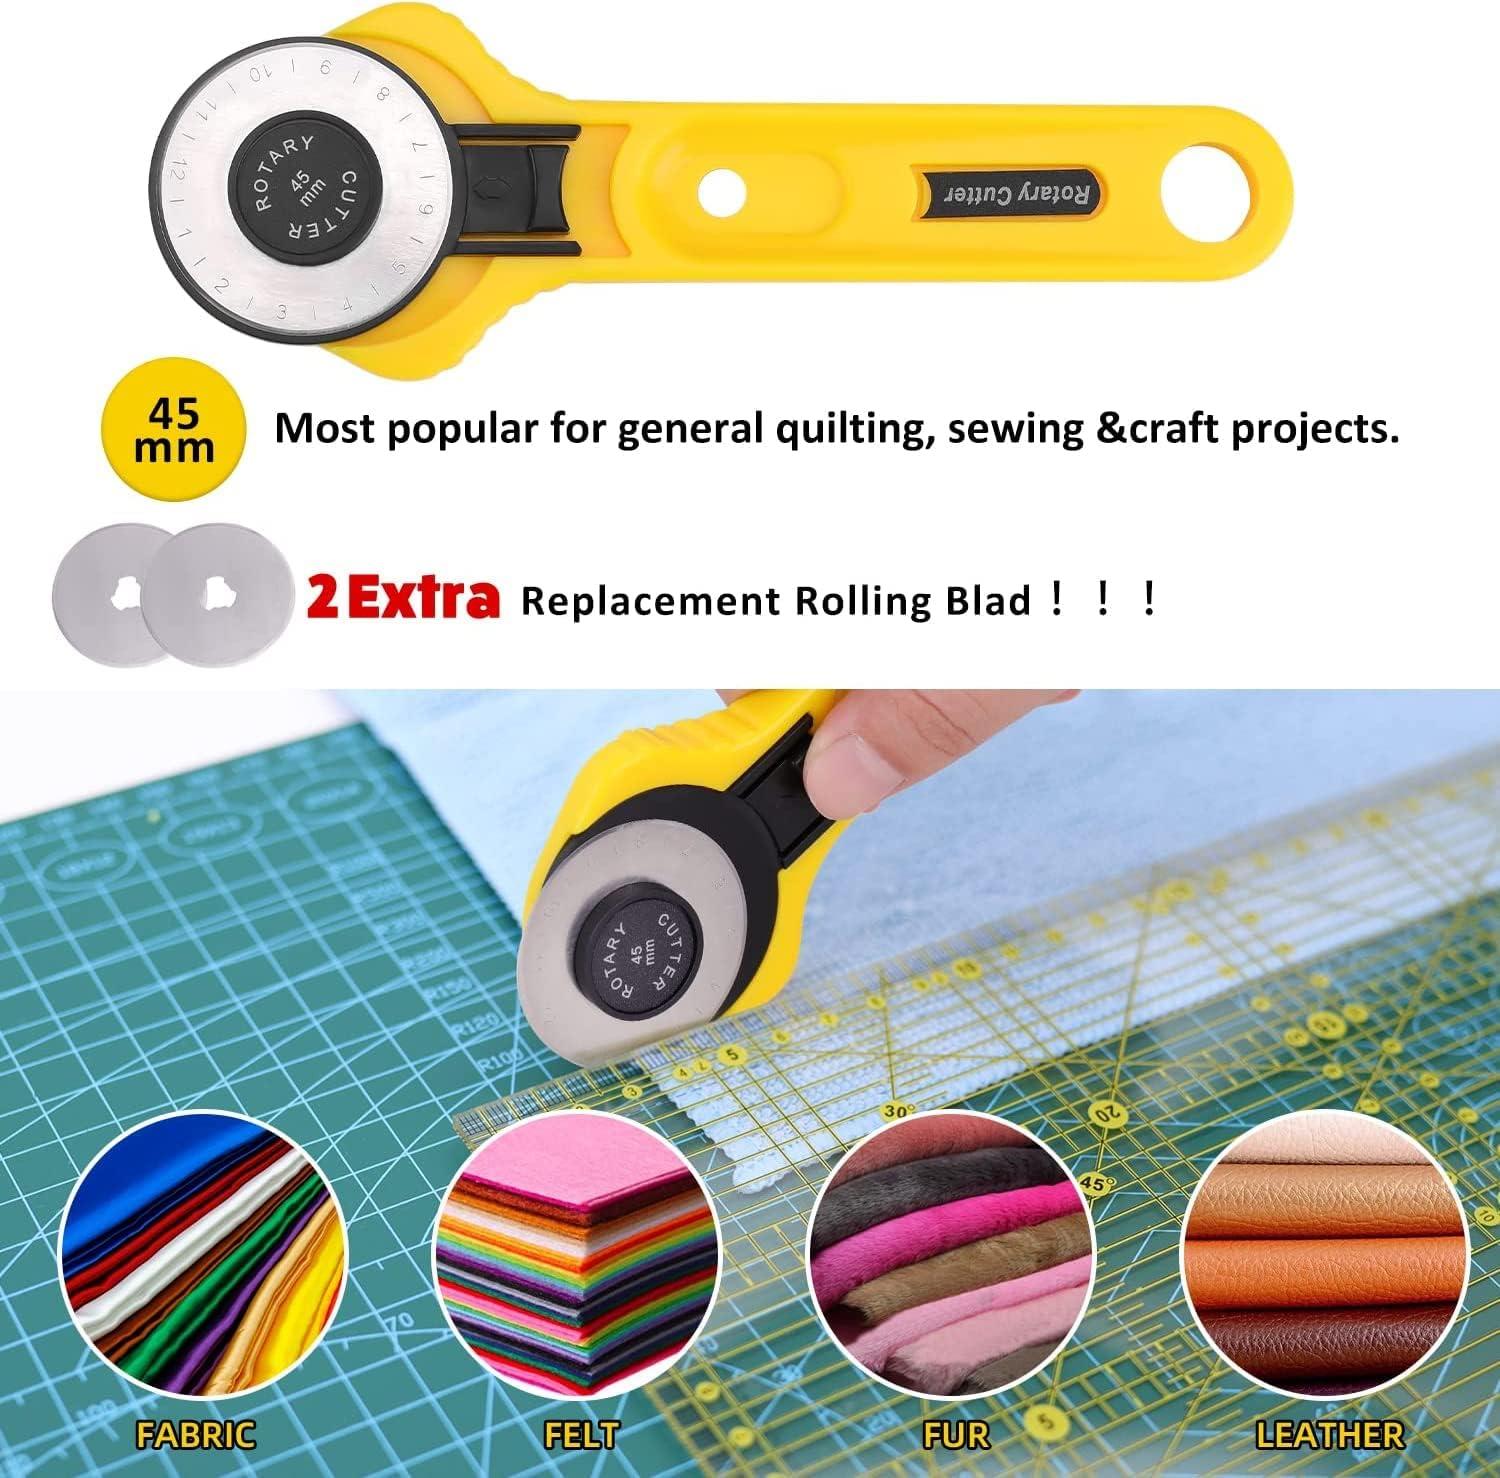 KingTool Rotary Cutter Set- 45mm Cutter Kit with A3 Cutting Mat, 3  Replacement Blades, Quilting Rulers, Sewing Clips, Sewing Pins - Perfect  for Crafting, Fabric, Quilting, Sewing 77Pcs